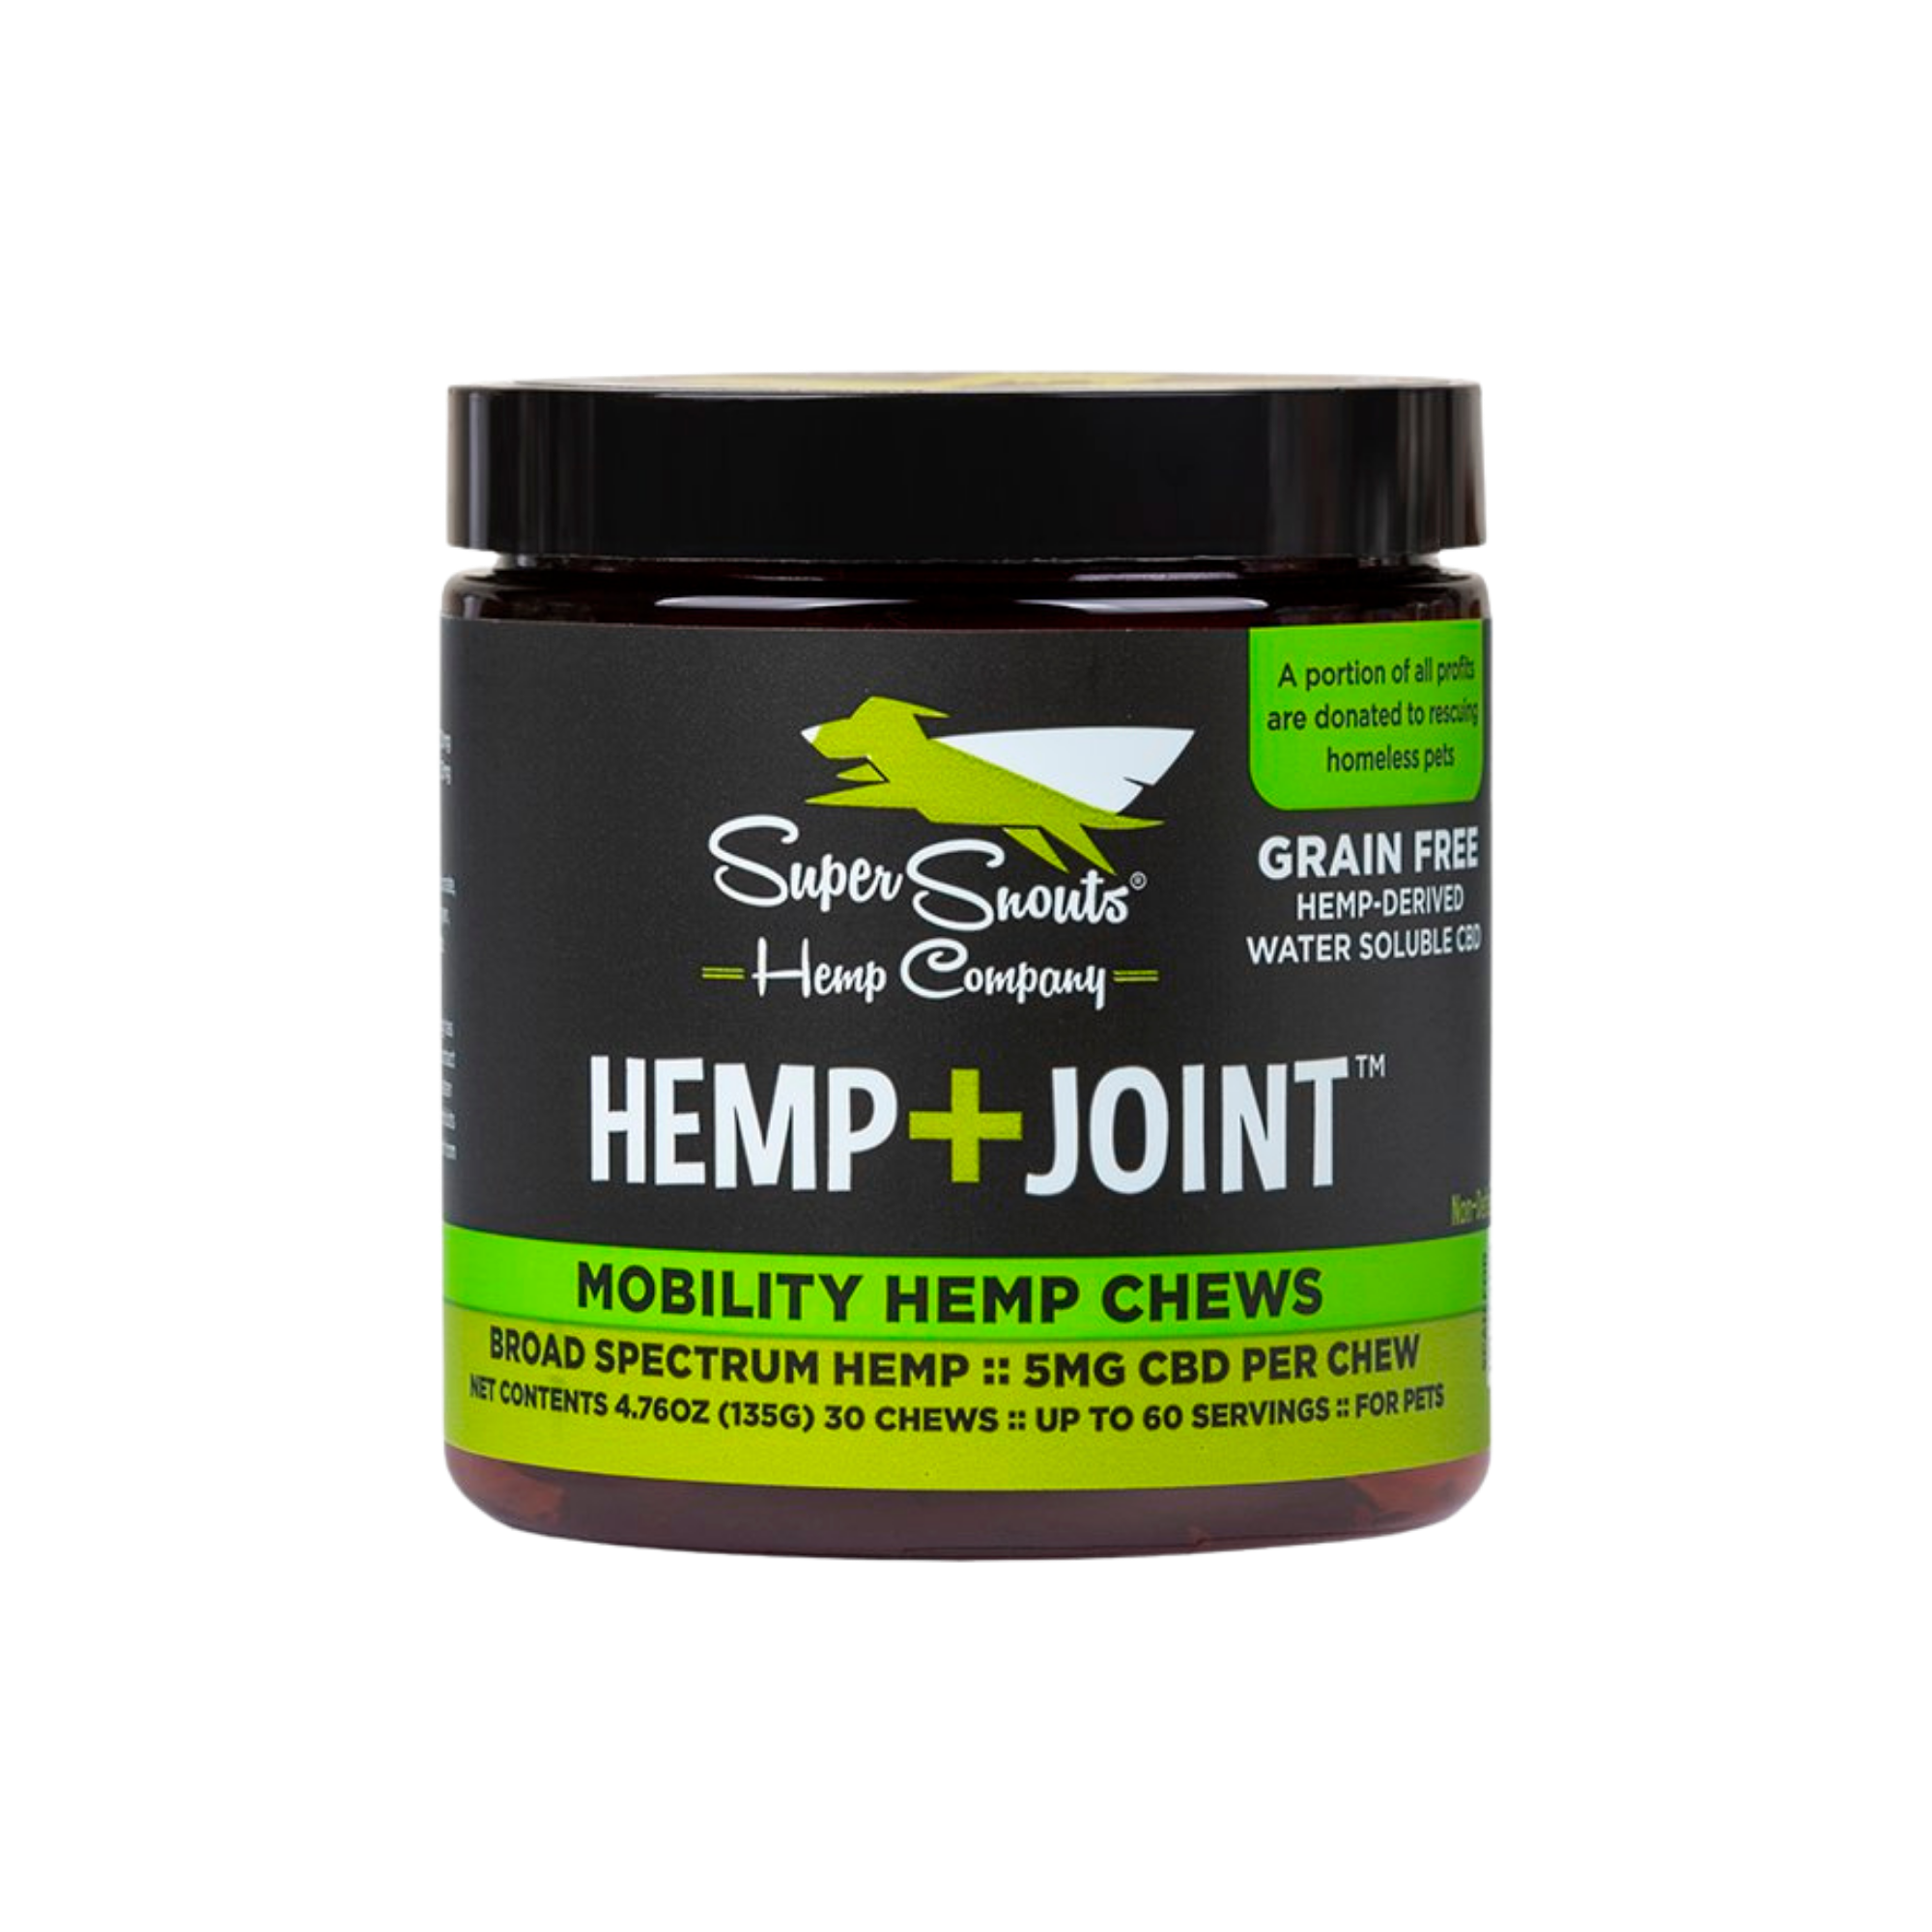 Super Snouts Hemp Supplement for Dogs & Cats 30 ct - Mutts & Co.